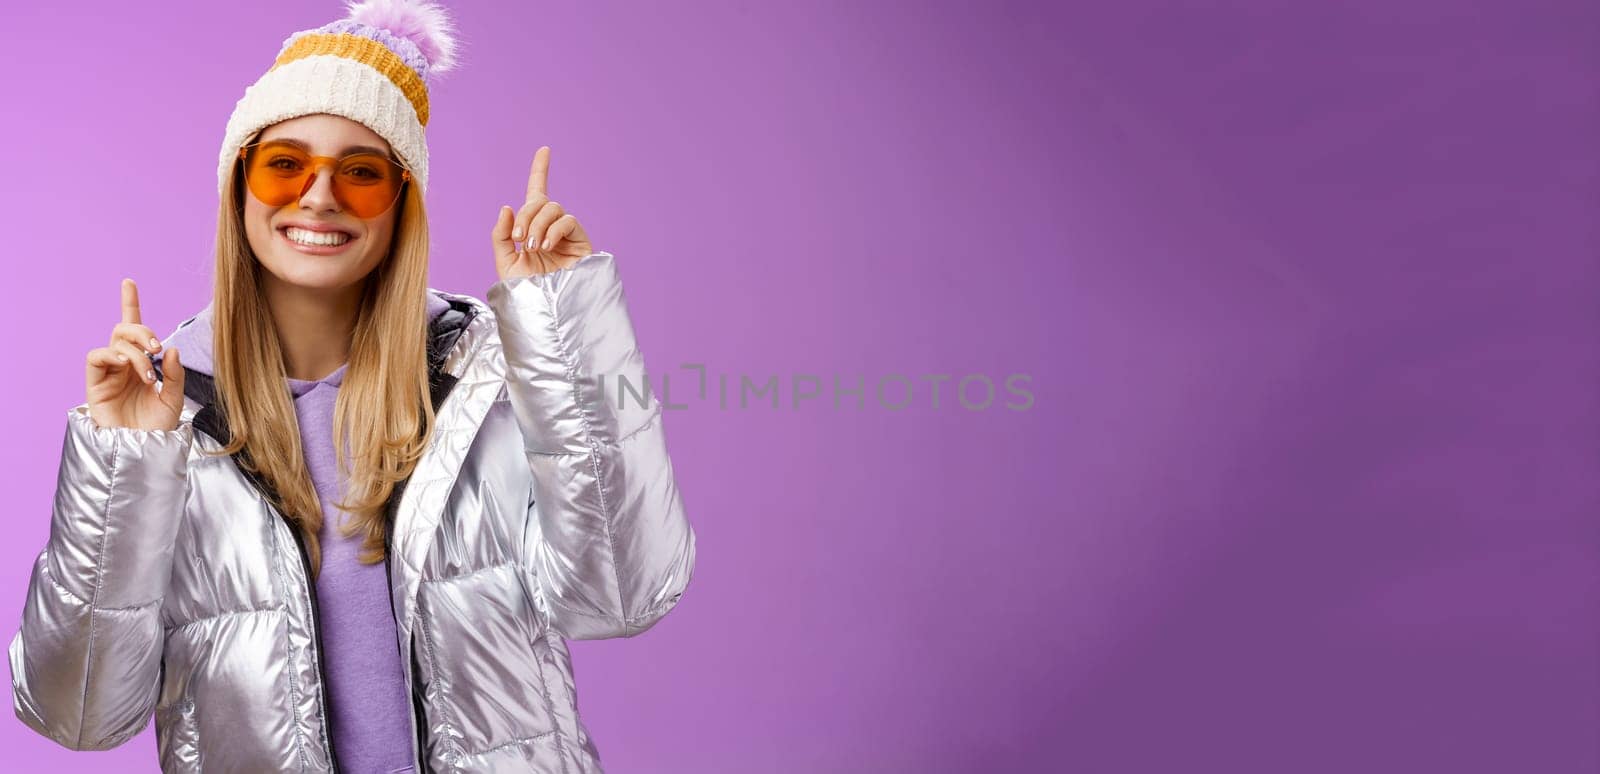 Lifestyle. Joyful energized entertained cute blond woman having fun enjoy vacation snowy mountain trip wearing sunglasses silver jacket winter hat dancing pointing up amused standing purple background.